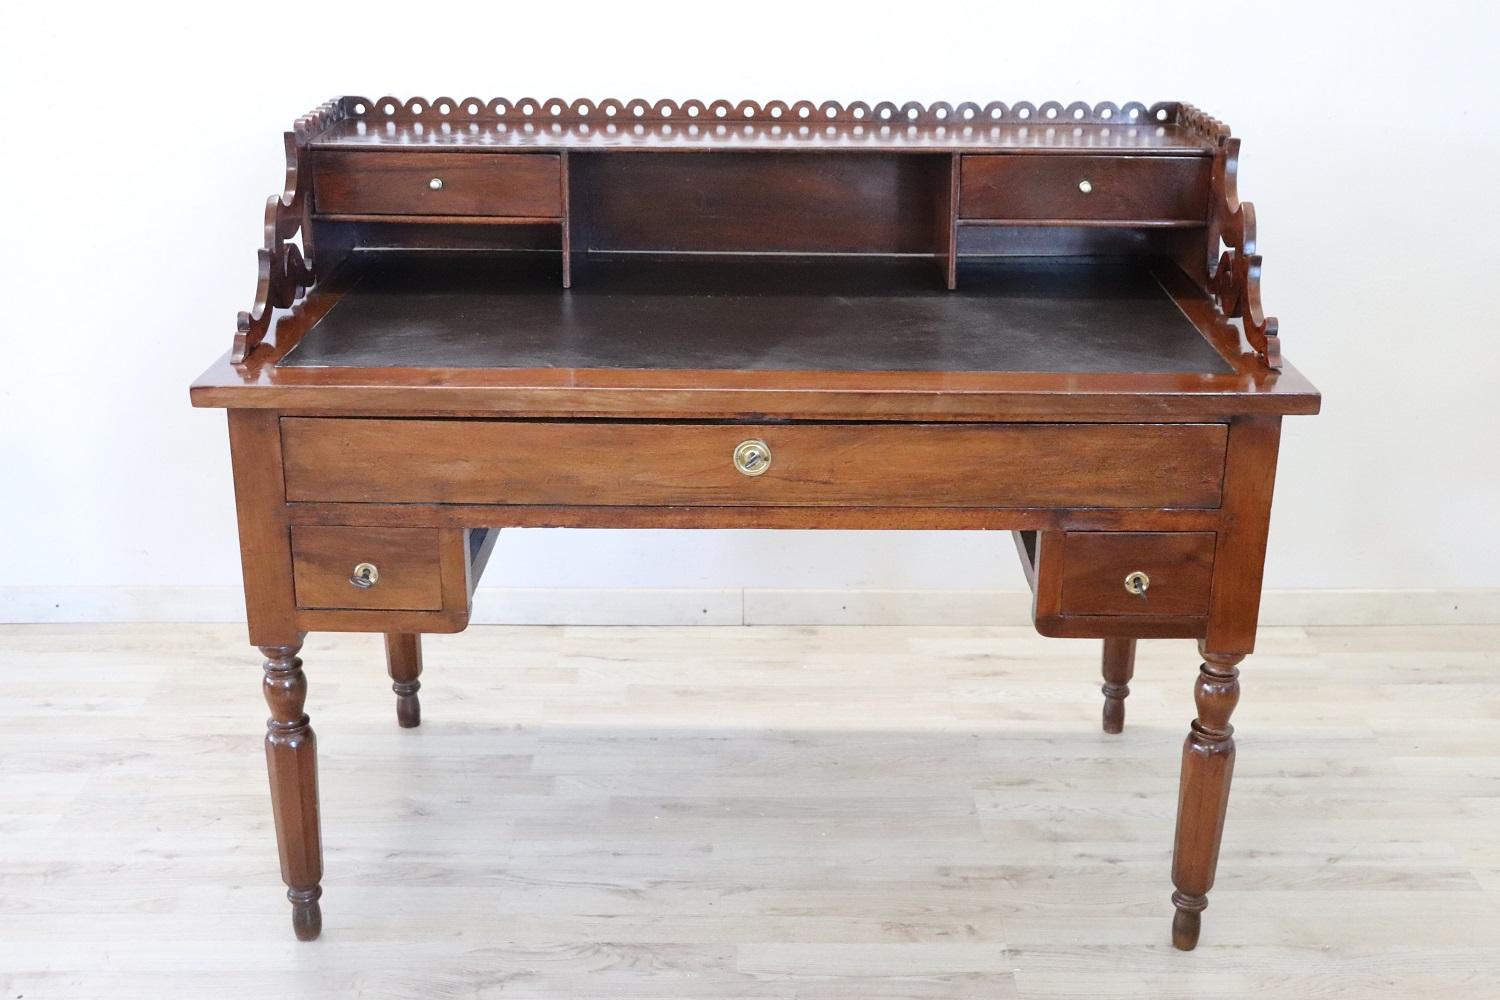 Elegant antique Italian writing desk. Rare and precious solid walnut wood. Comfortable size for a practical use. The desk has elegant turned legs. In the lower part three drawers and in the upper part two smaller drawers. Excellent condition ready